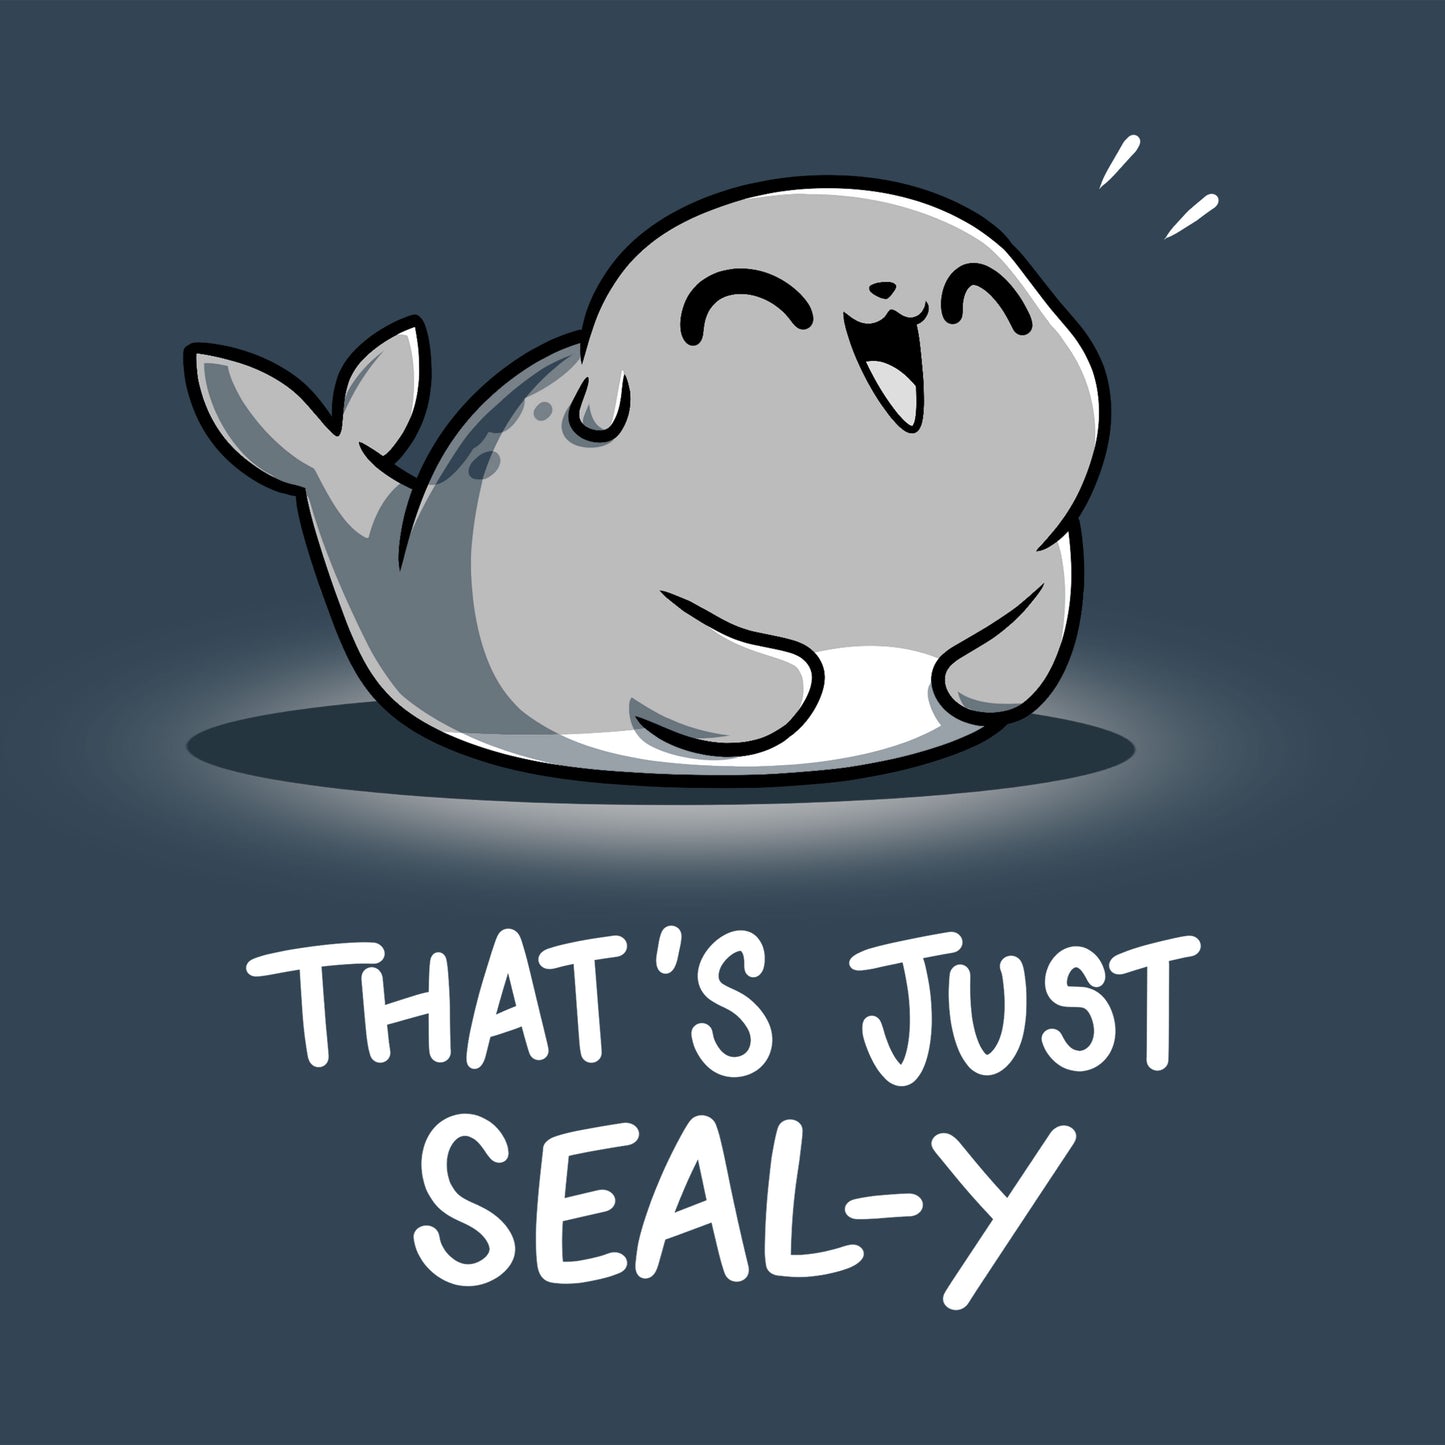 That's Just Seal-y is just a bad pun on a TeeTurtle denim blue t-shirt.